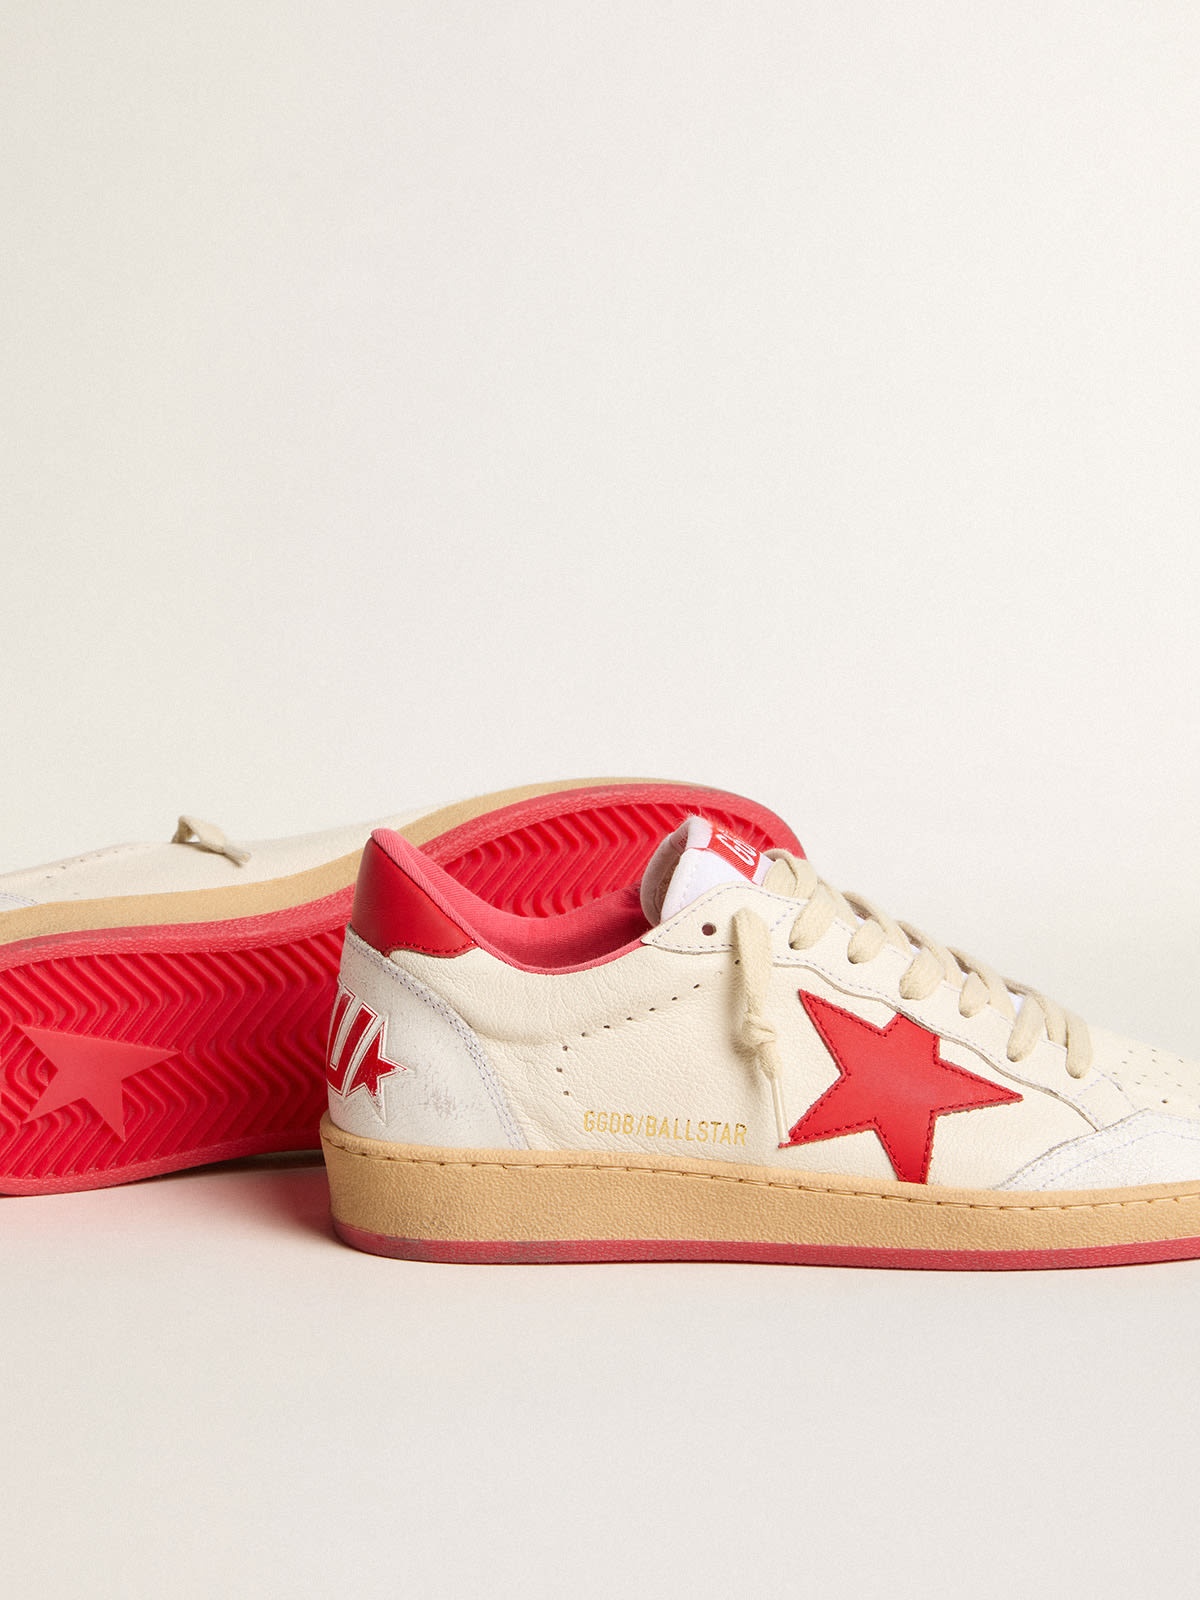 Men’s Ball Star  Wishes in white leather with a red star and heel tab - 4